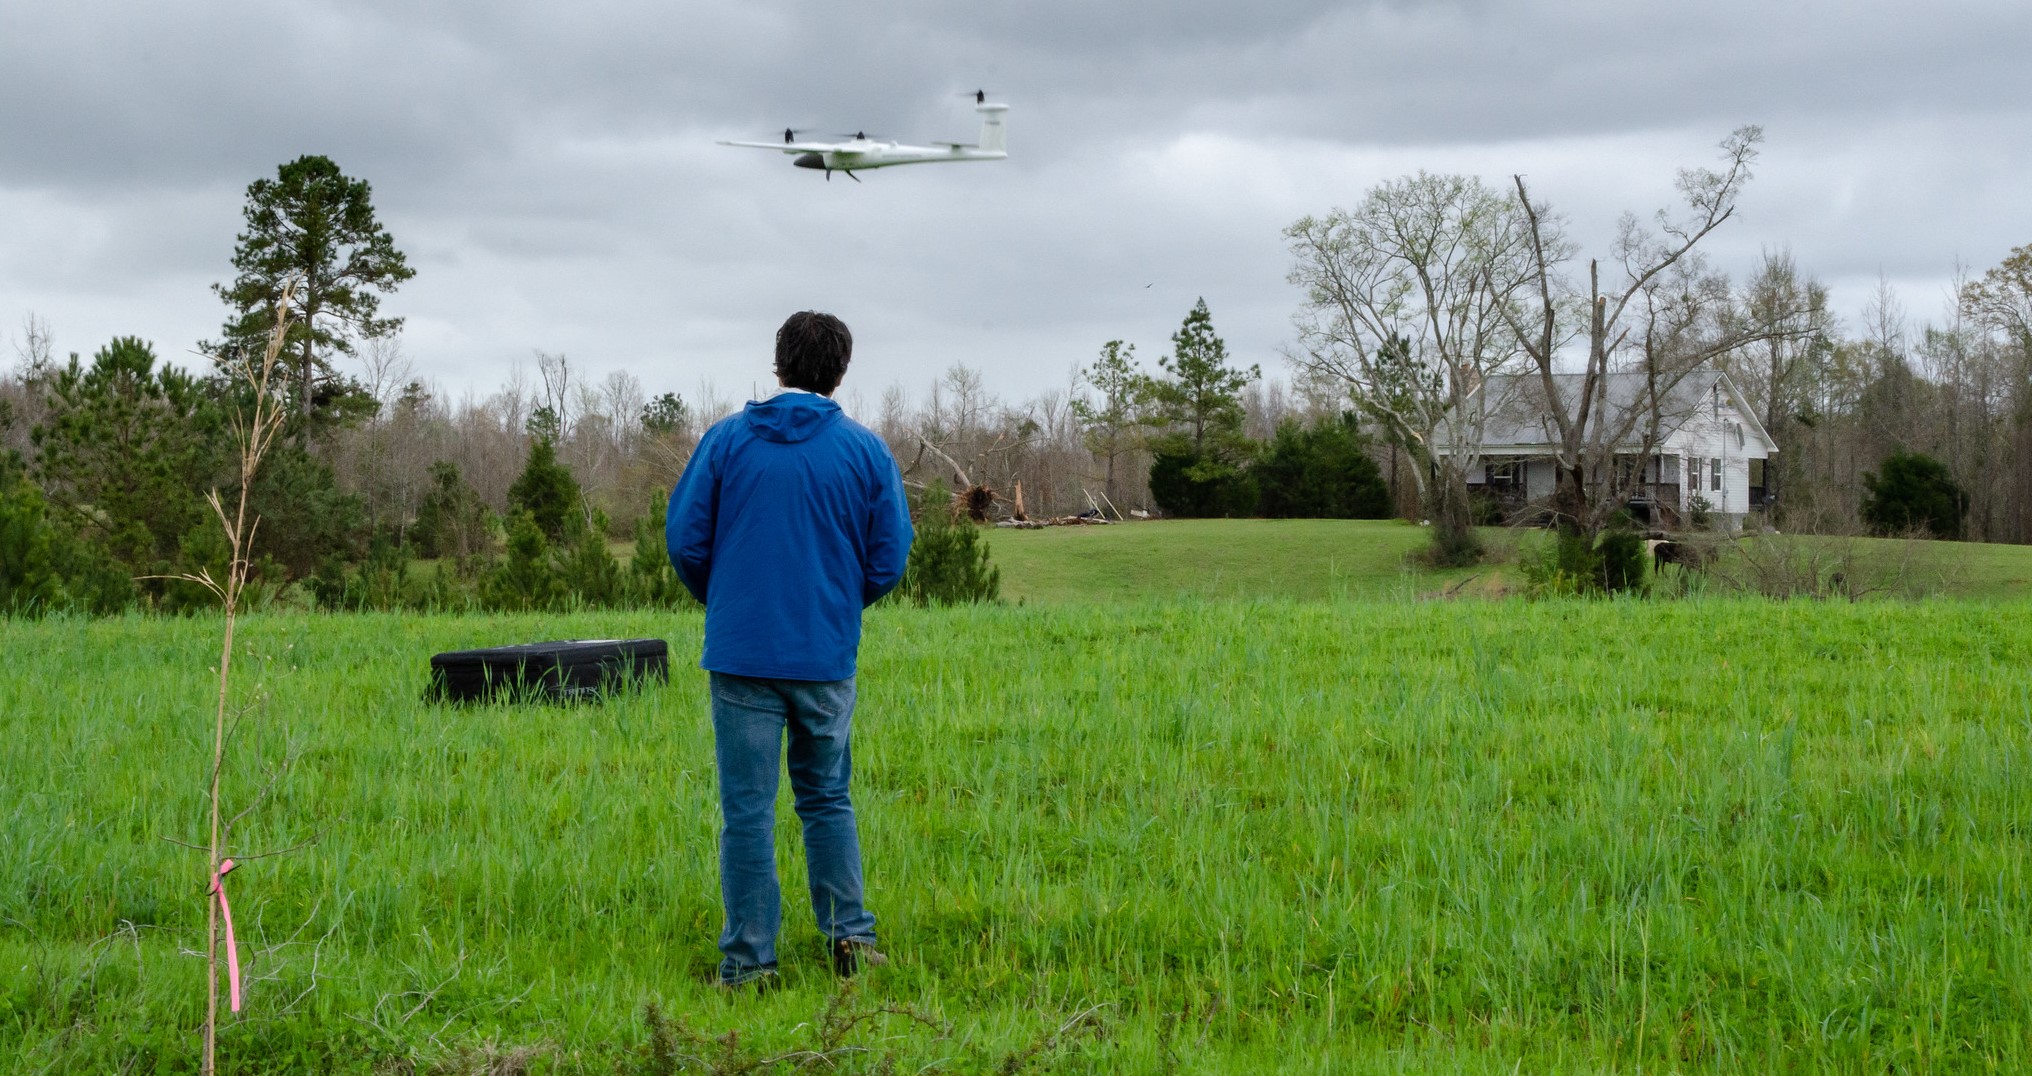 A researcher with the NOAA National Severe Storms Laboratory flies a drone near tornado damage in Alabama in April 2021. Scientists hope aerial images of tornado paths of destruction can better characterize high-wind damage to vegetation and in rural areas to improve disaster response and recovery.